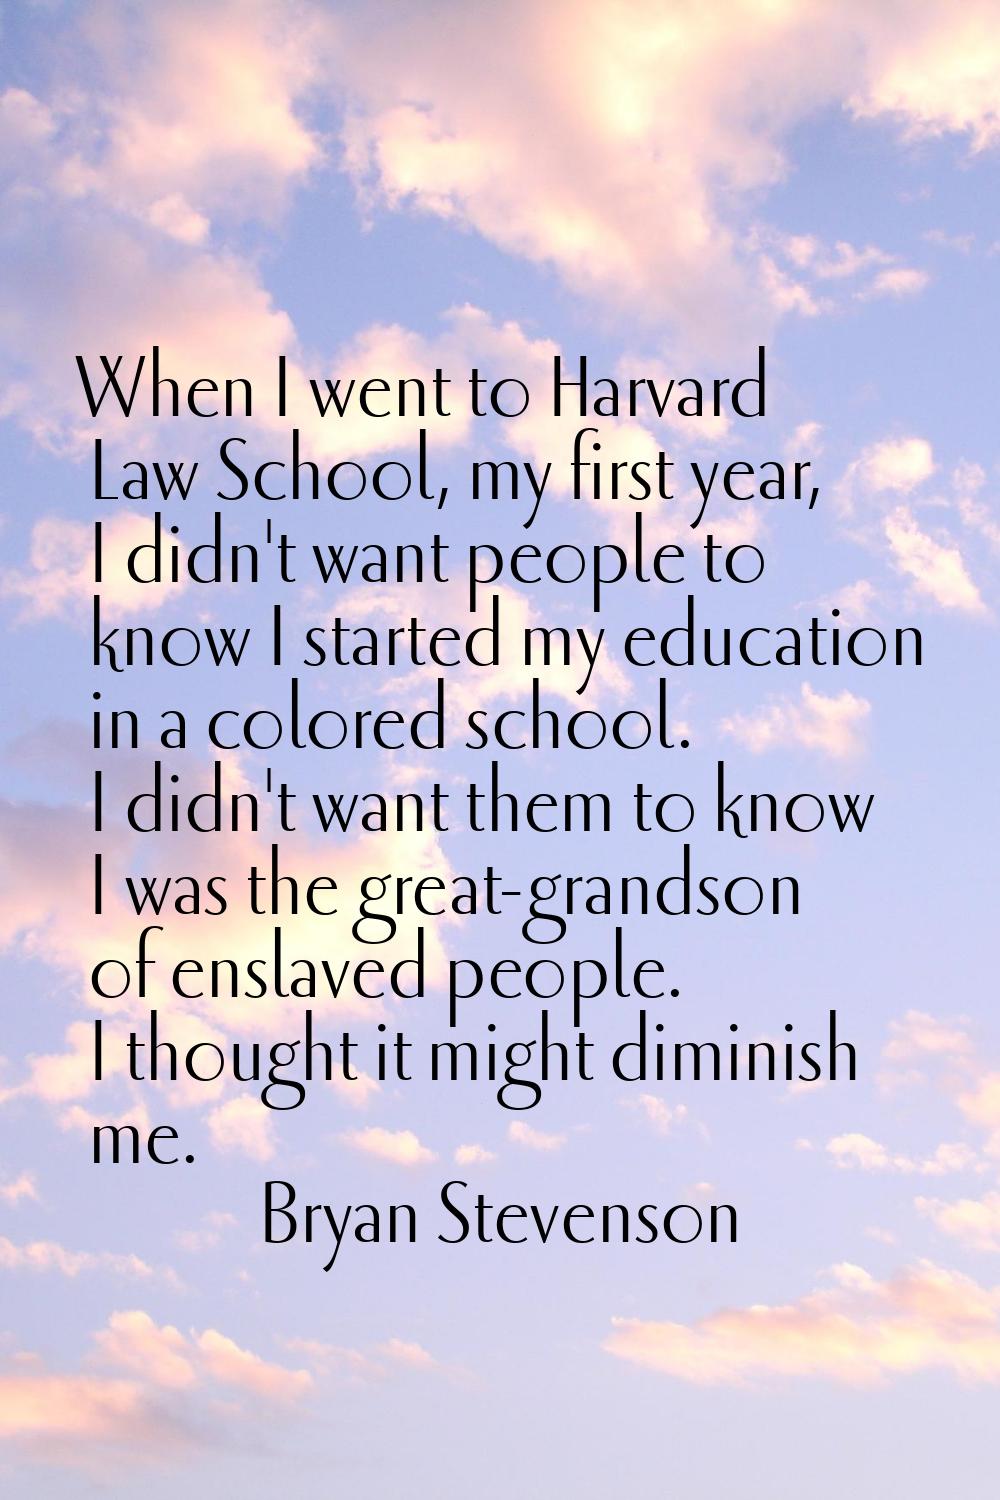 When I went to Harvard Law School, my first year, I didn't want people to know I started my educati